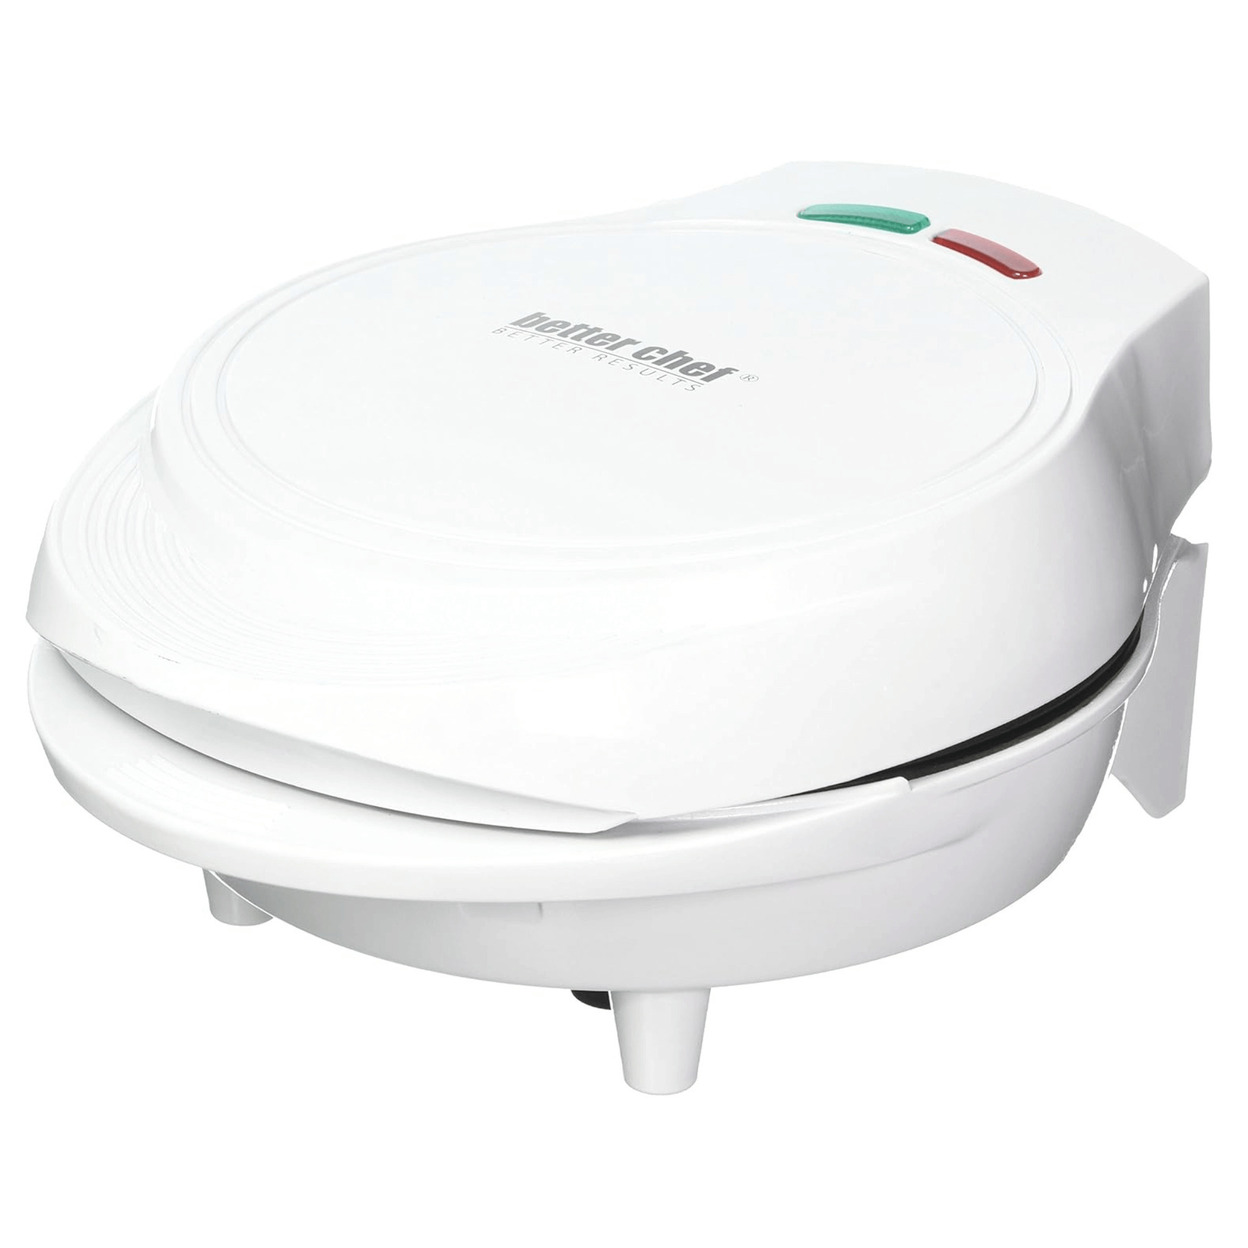 Better Chef Electric Double Omelette Maker- White - image 1 of 3